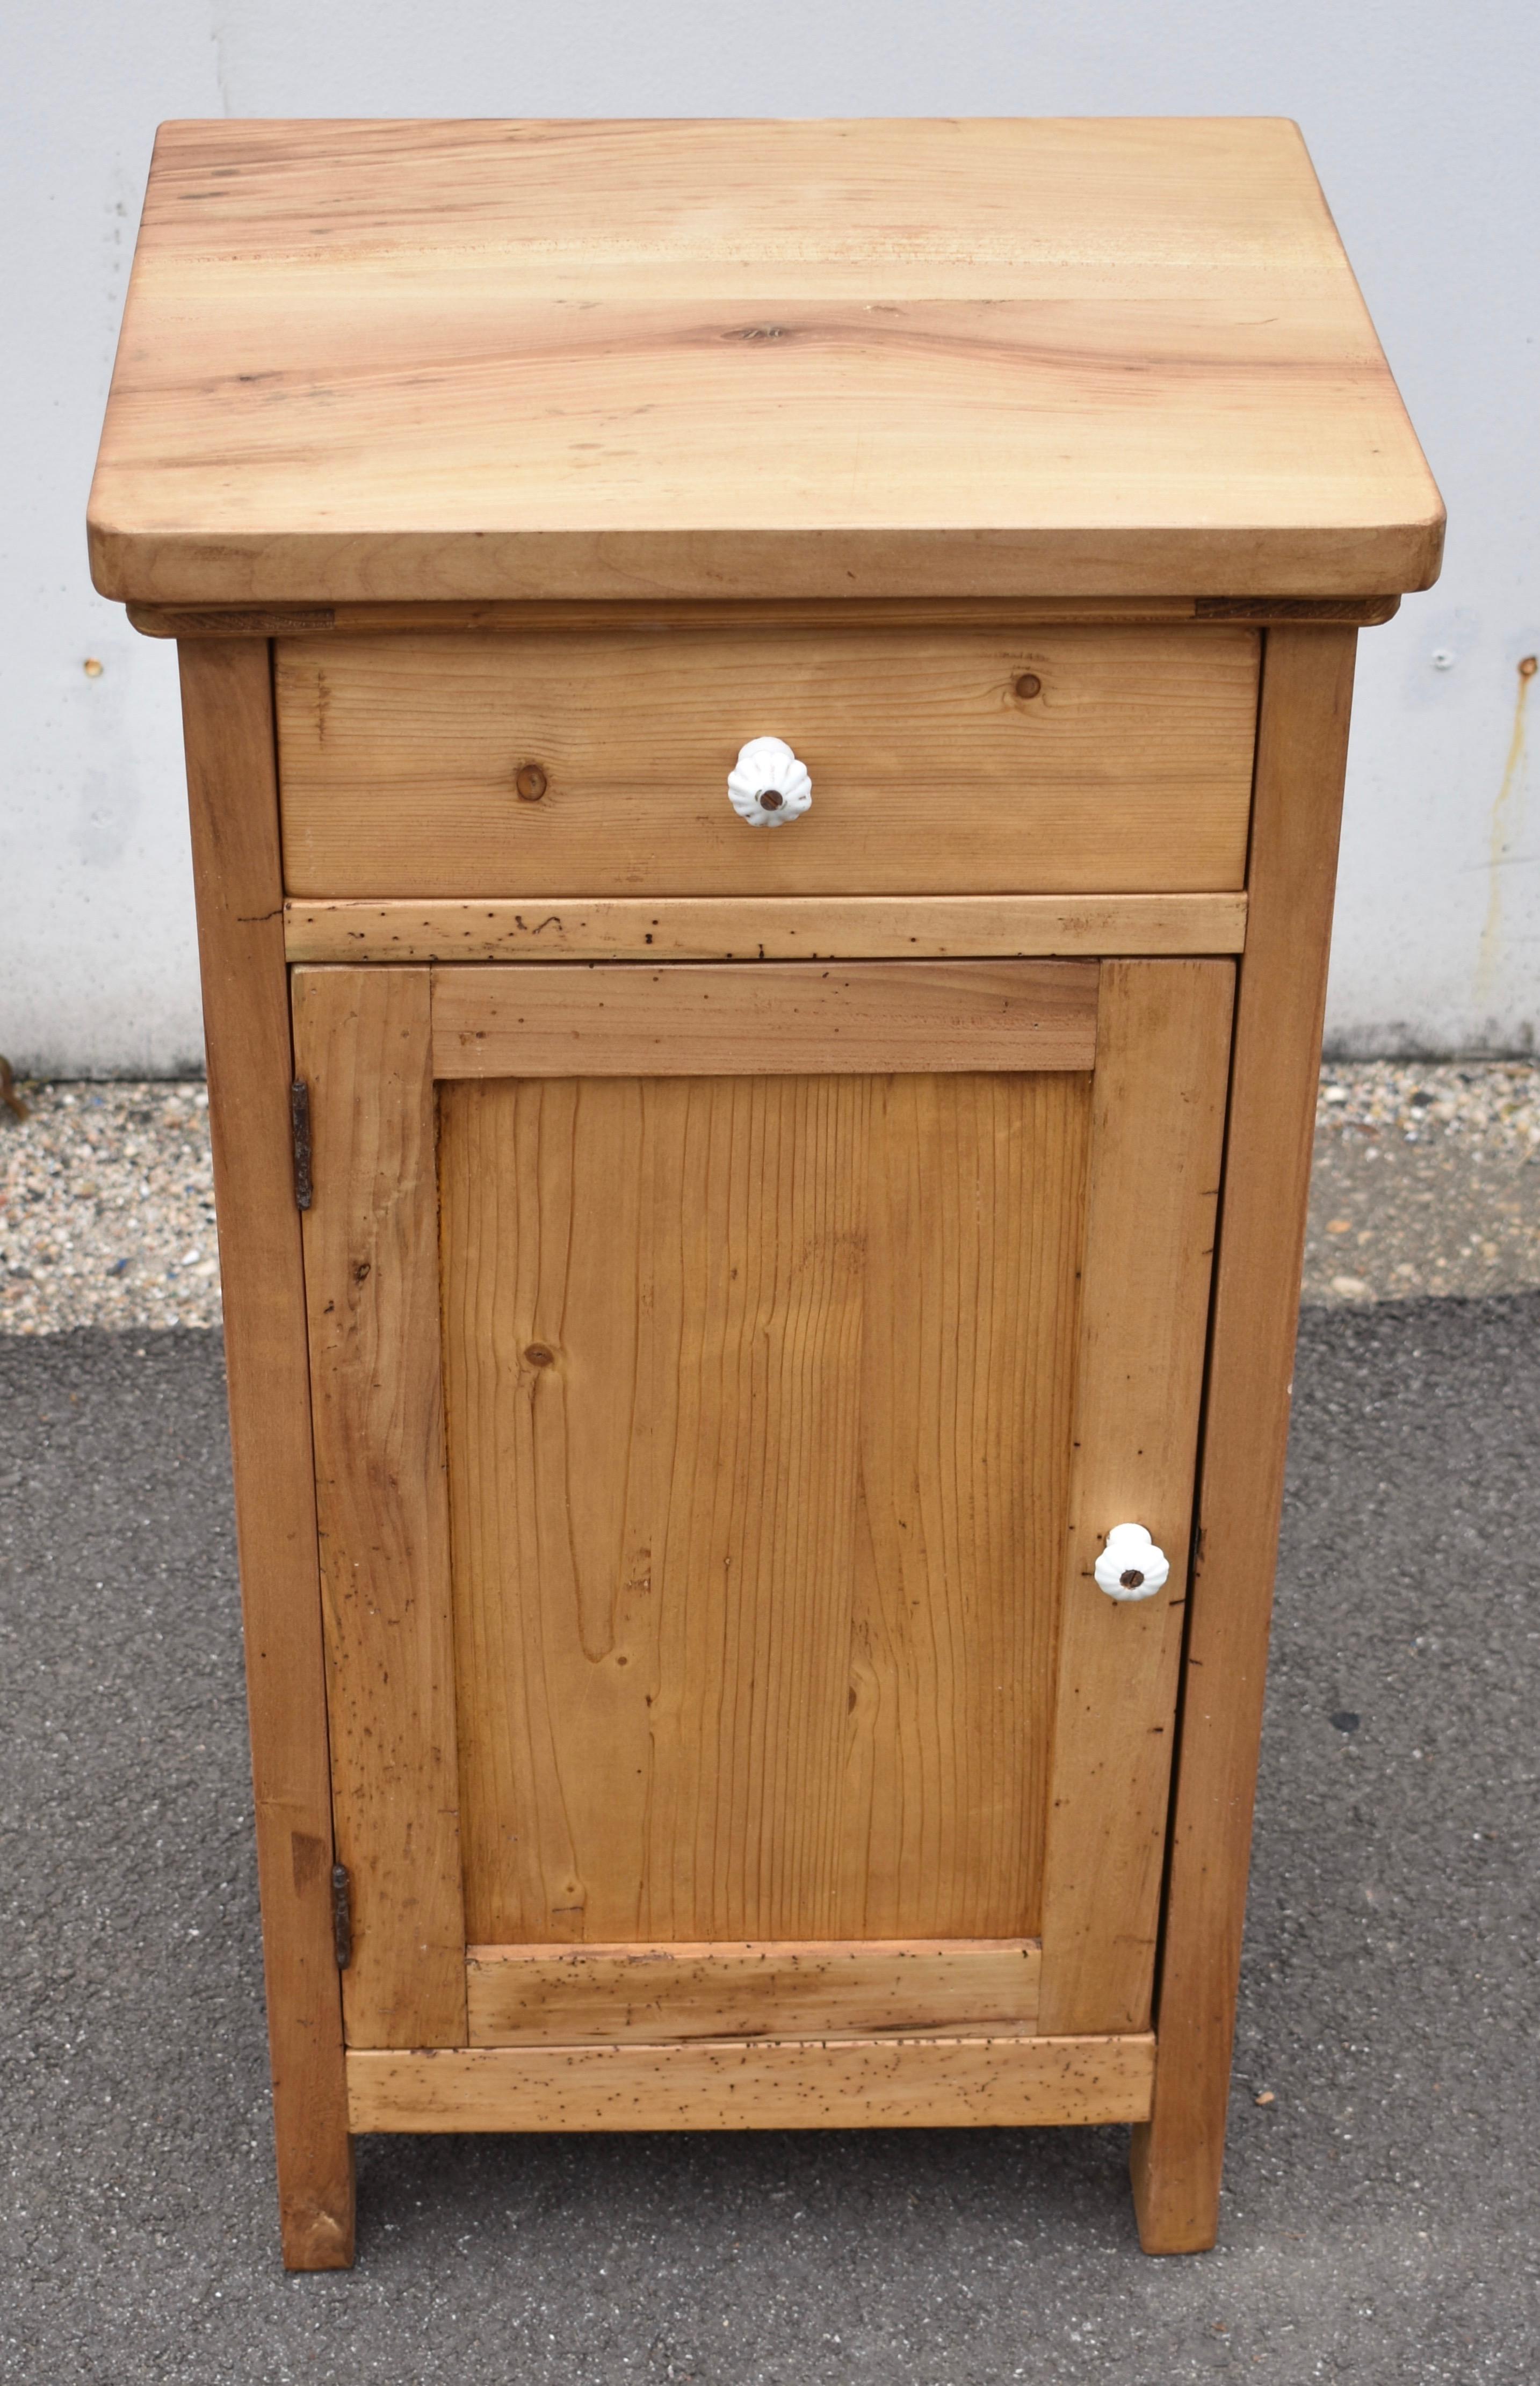 This is an attractive mixed wood nightstand.  The thick top and the frame are beech and the panels and drawer front are pine.  The contrast in wood species works well with the clean straight lines of the cupboard.  There is a single shelf in the